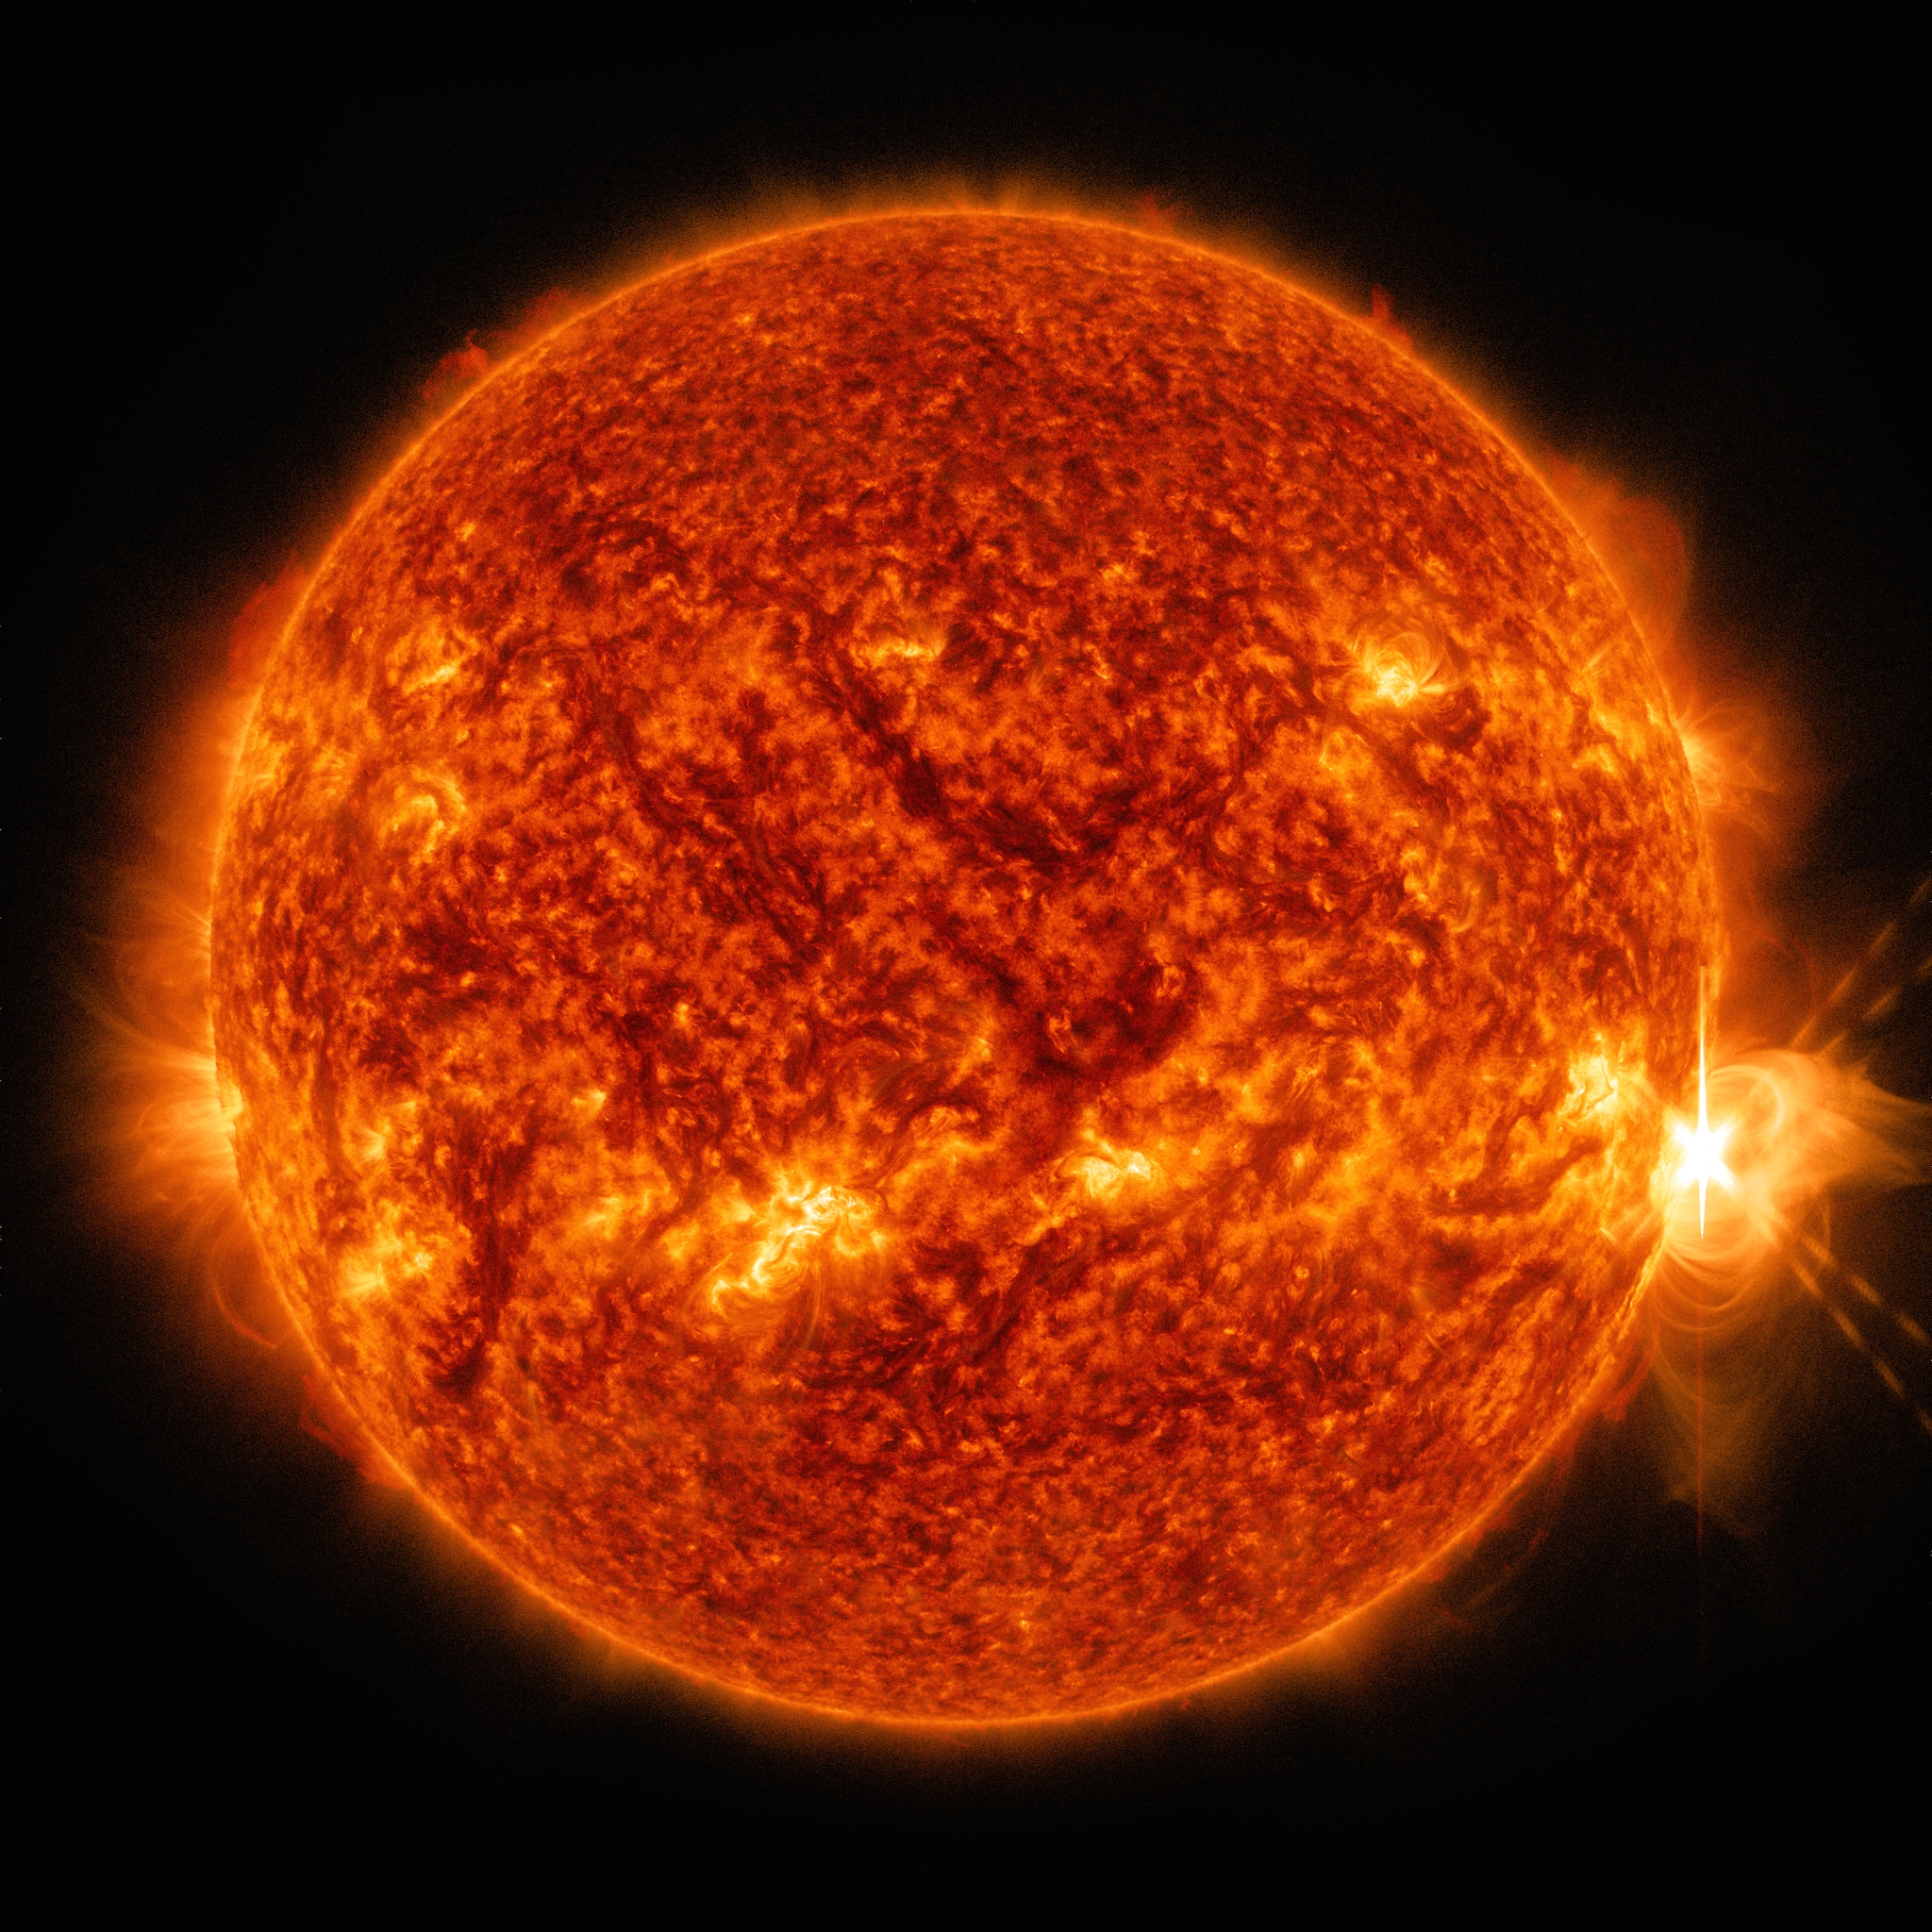 An X 1.4 solar flare erupted on the right side of the sun on the evening of April. 24, 2014. This composite image, captured at 8:42 p.m. EST, shows the sun in ultraviolet light with wavelength of both 131 and 304 angstroms.